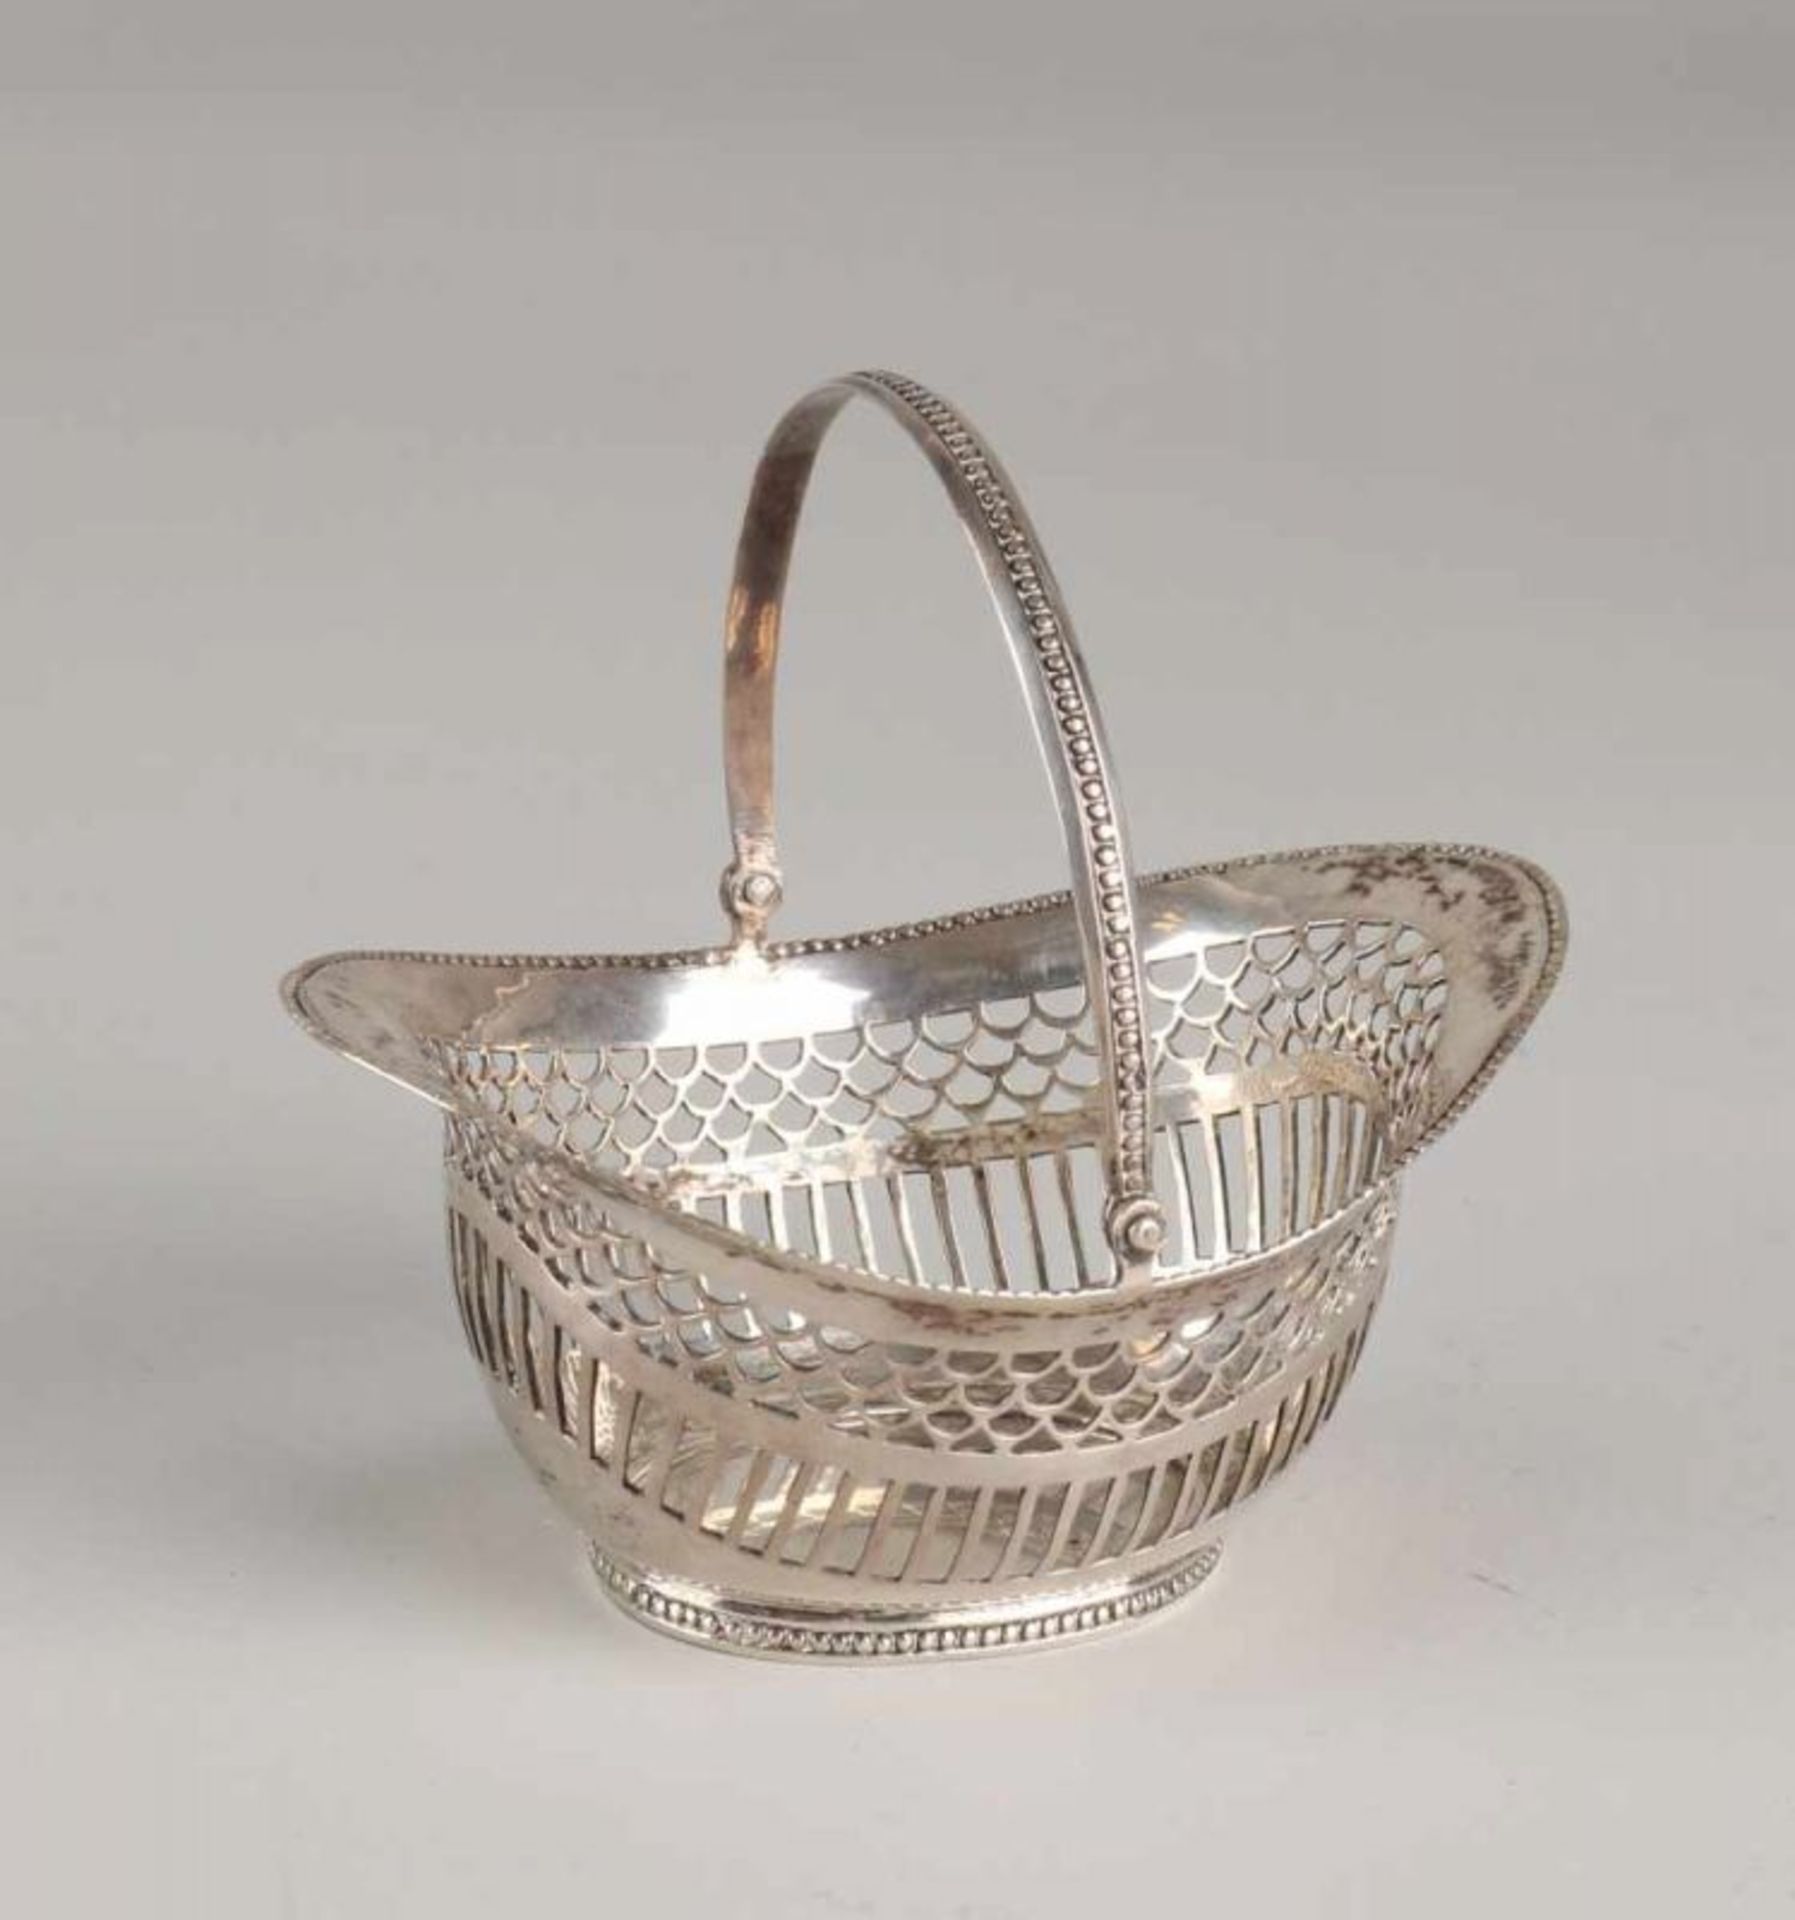 Silver tangle basket, 833/000, oval model with a sawn bars and semi-circle pattern. Placed on an